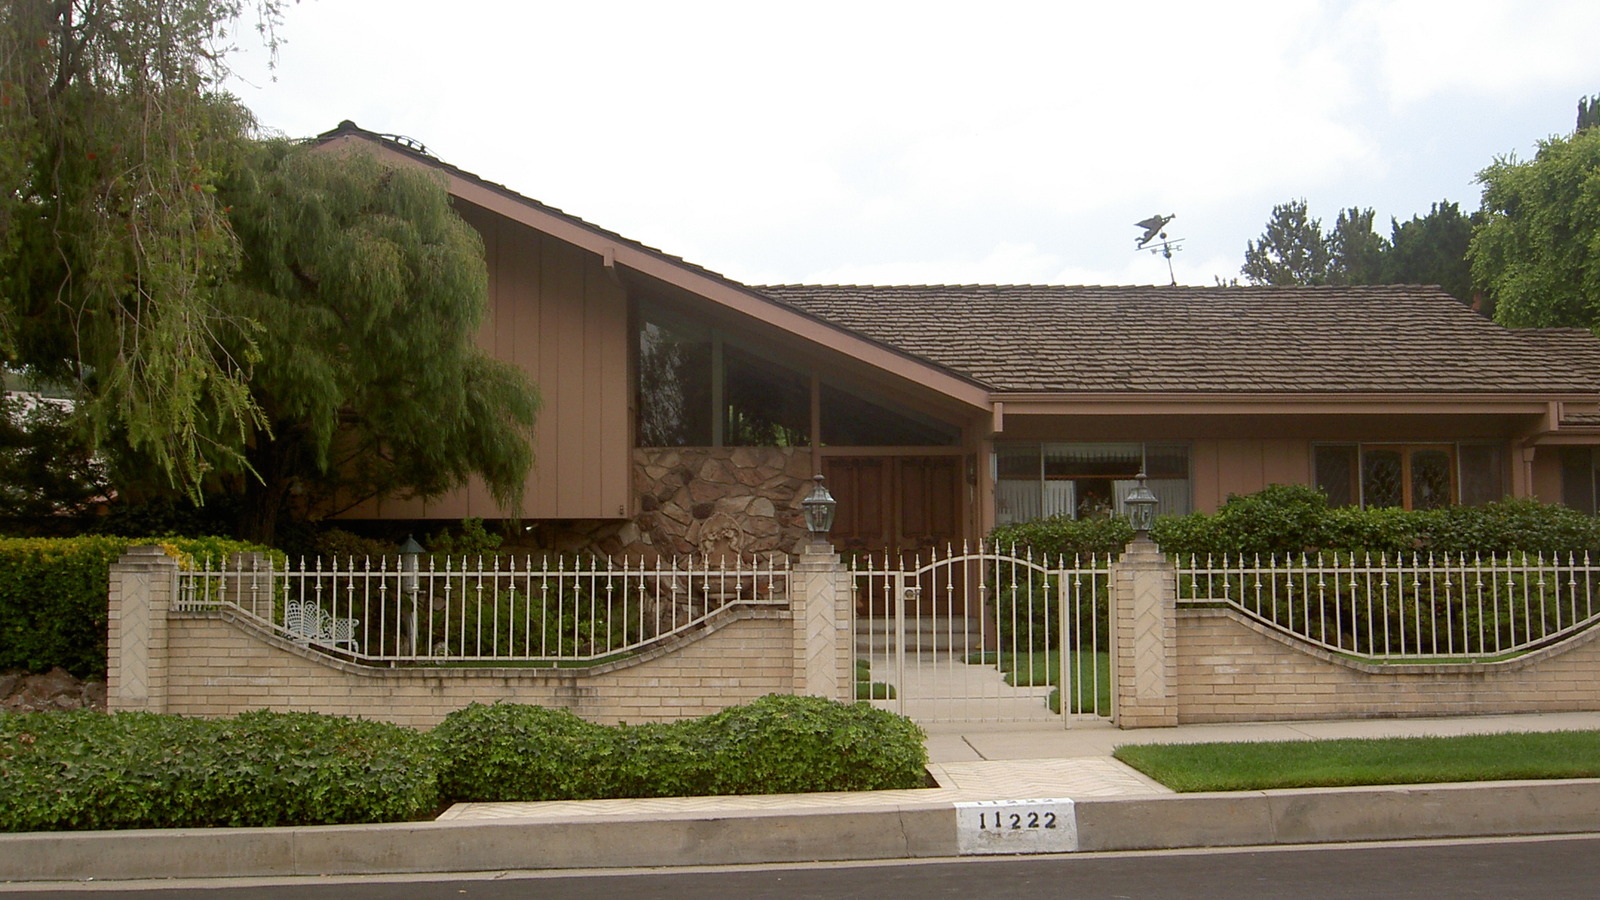 What The Brady Bunch House Looks Like Now After Renovation